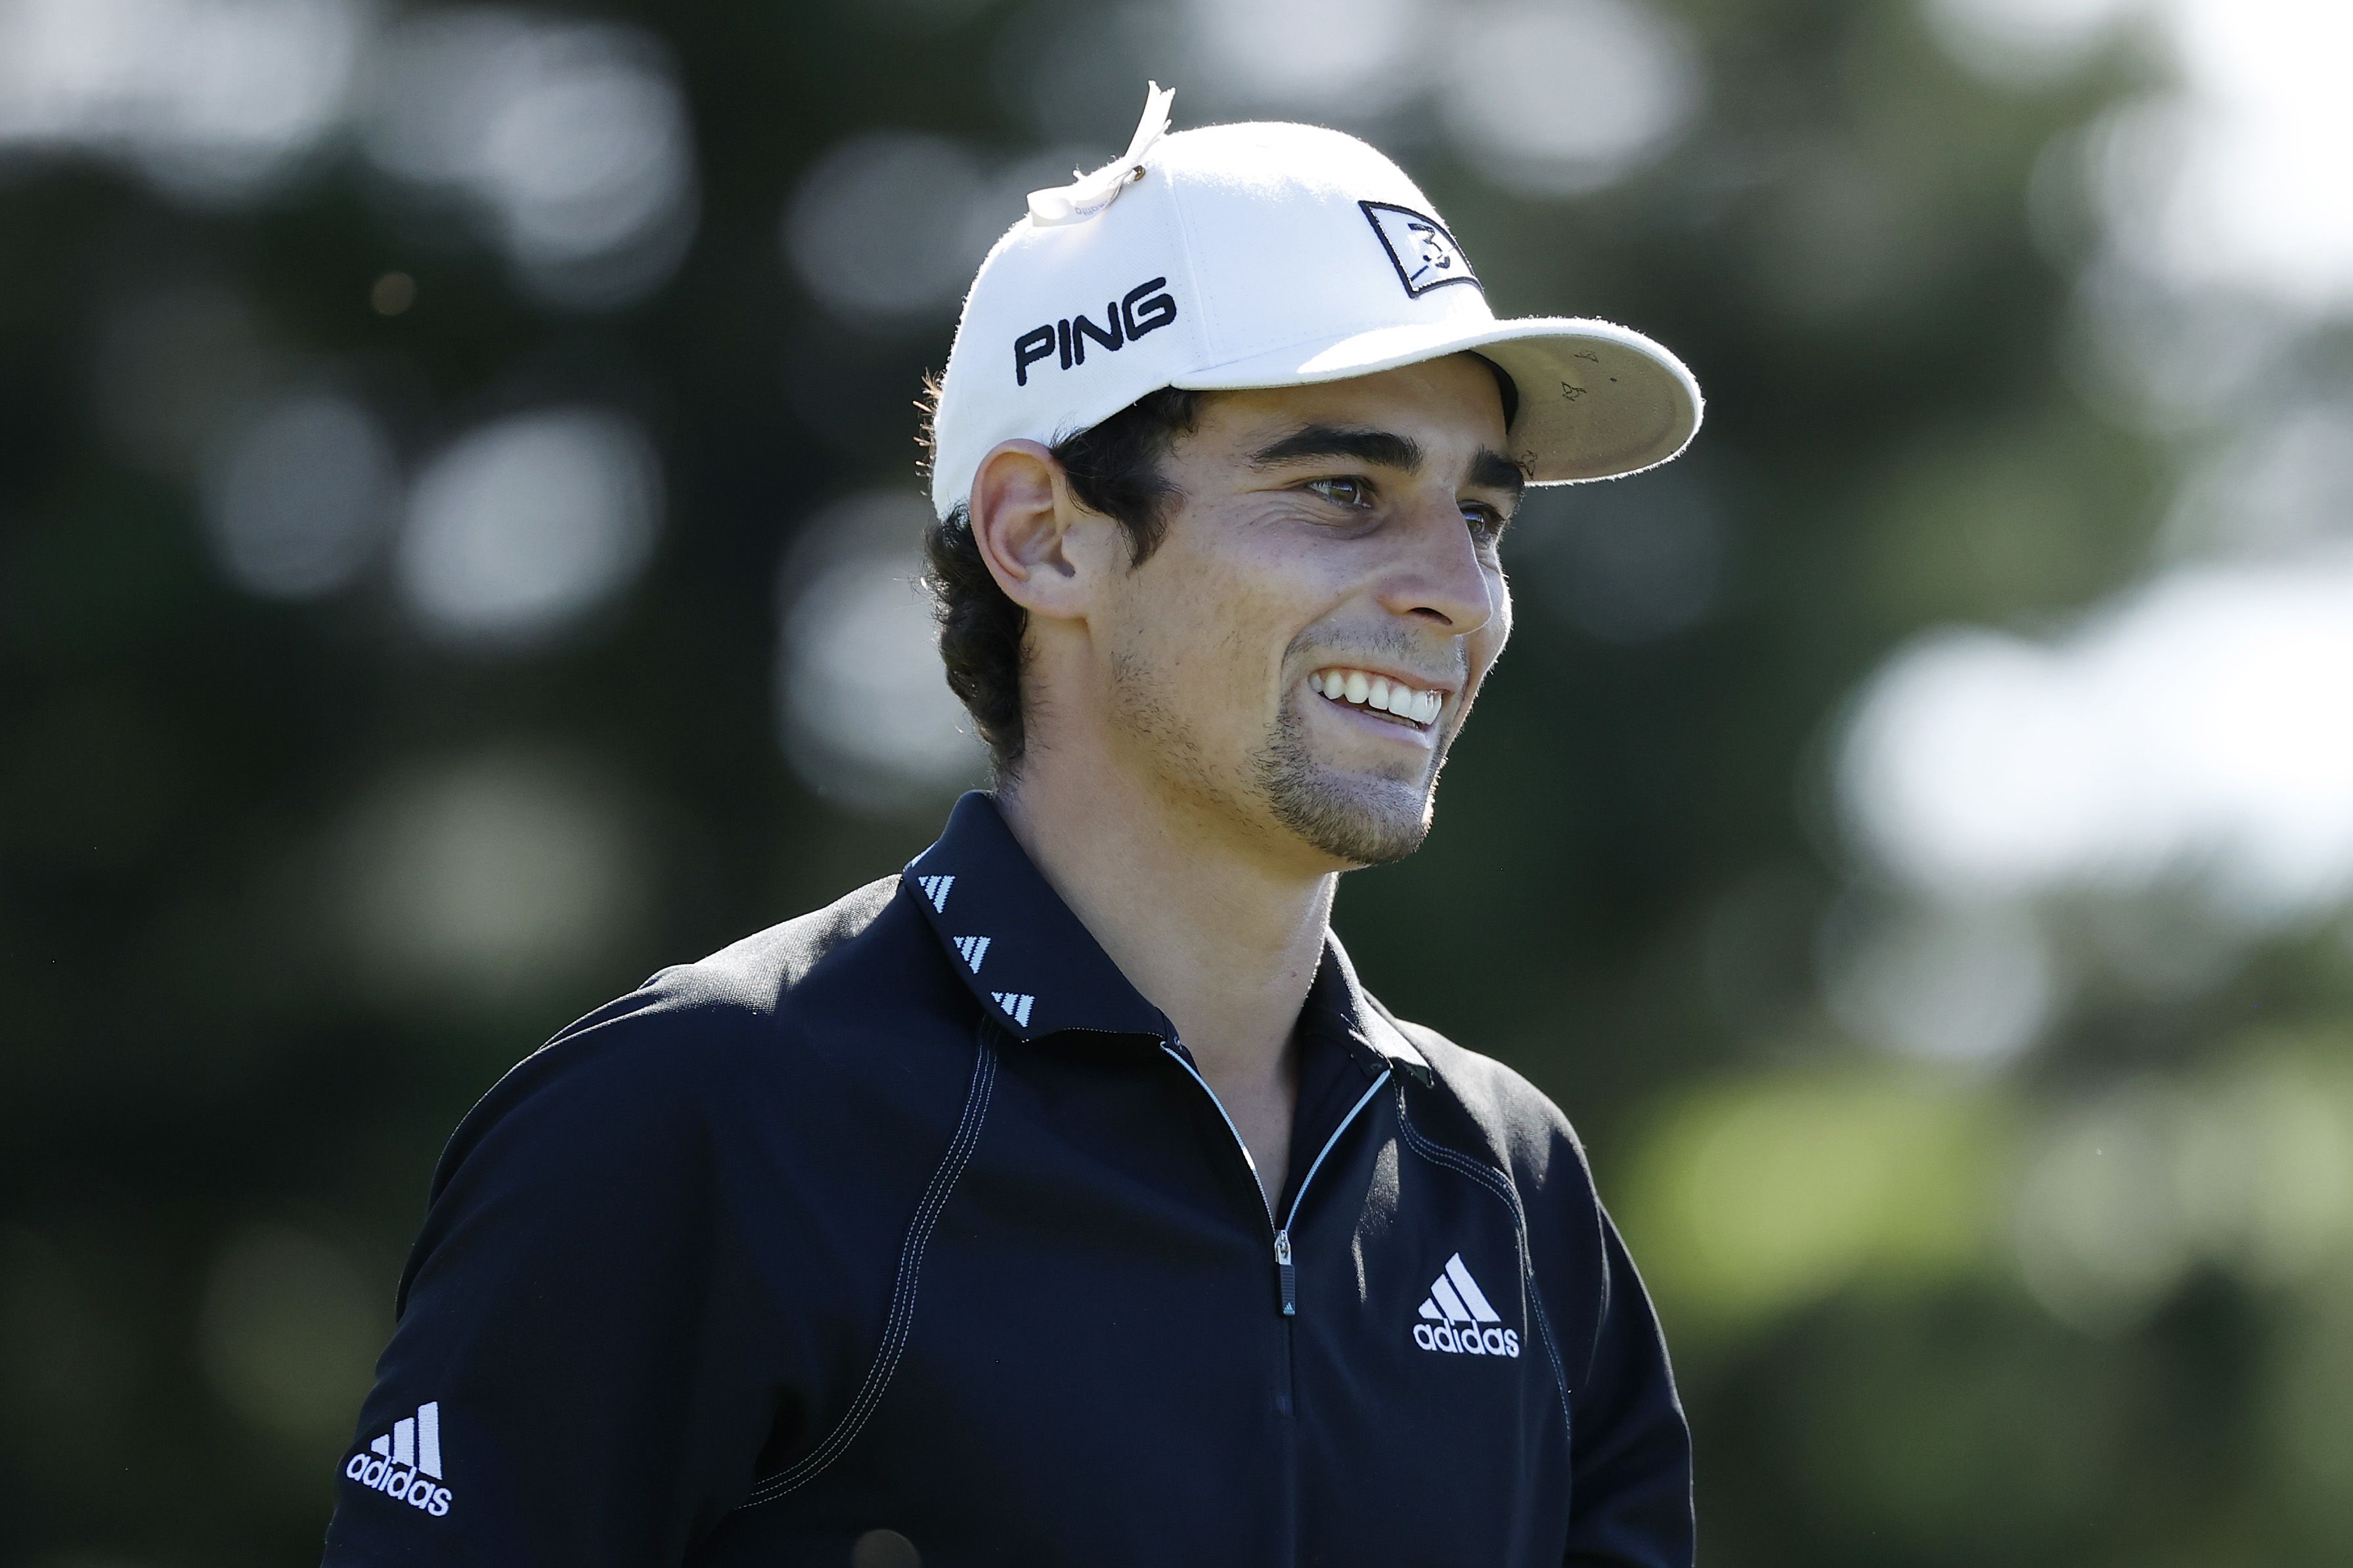 Don't care about Olympic golf? Joaquin Niemann knows 18 million who do